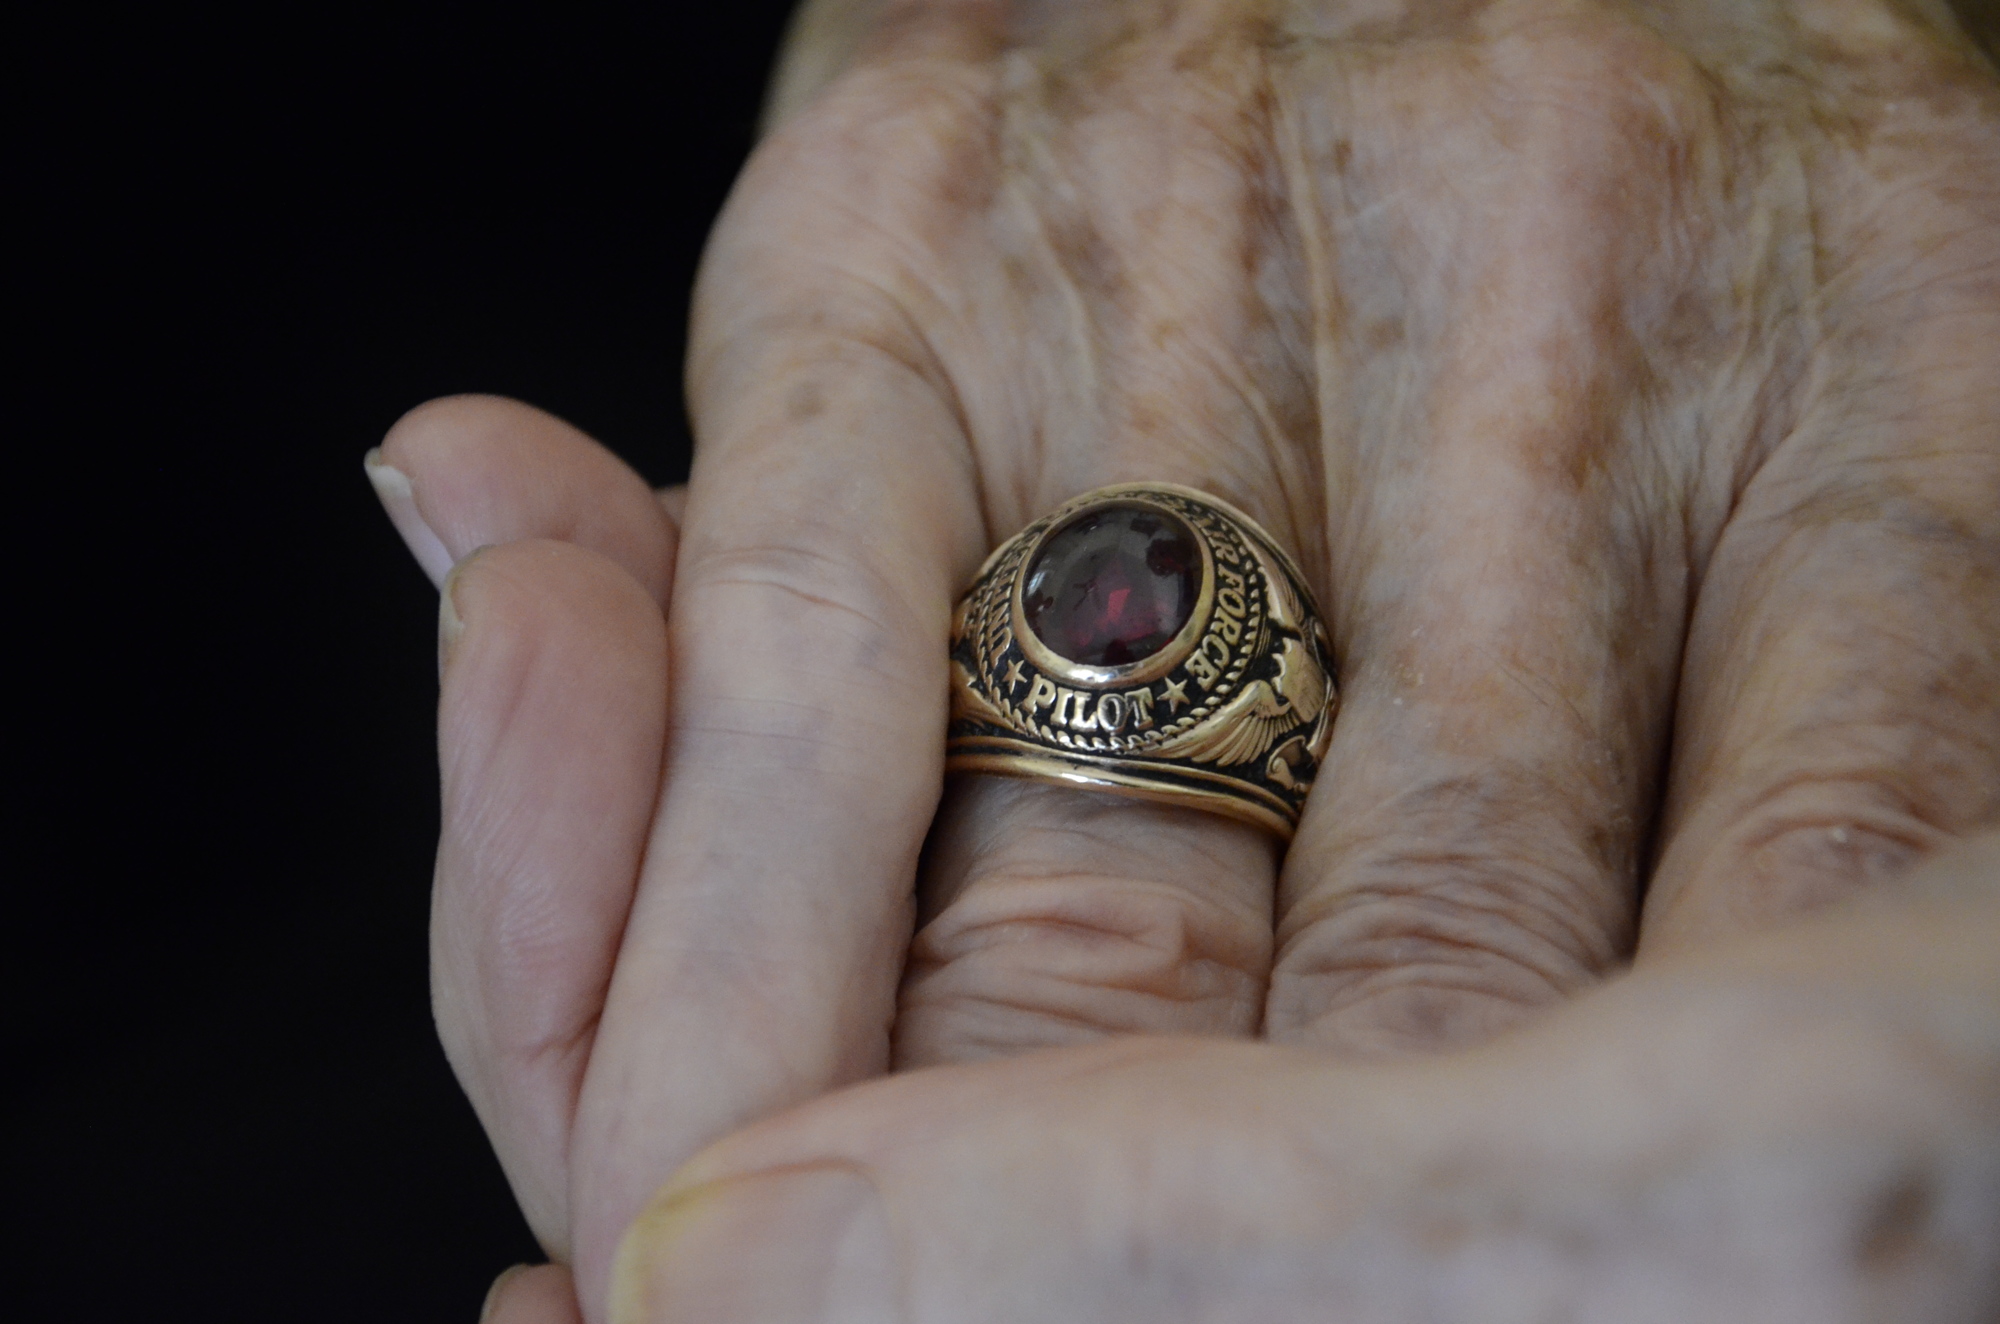 Hank Lackey wears this ring from the Air Force every day. “I just wanted to fly all the time,” he said.